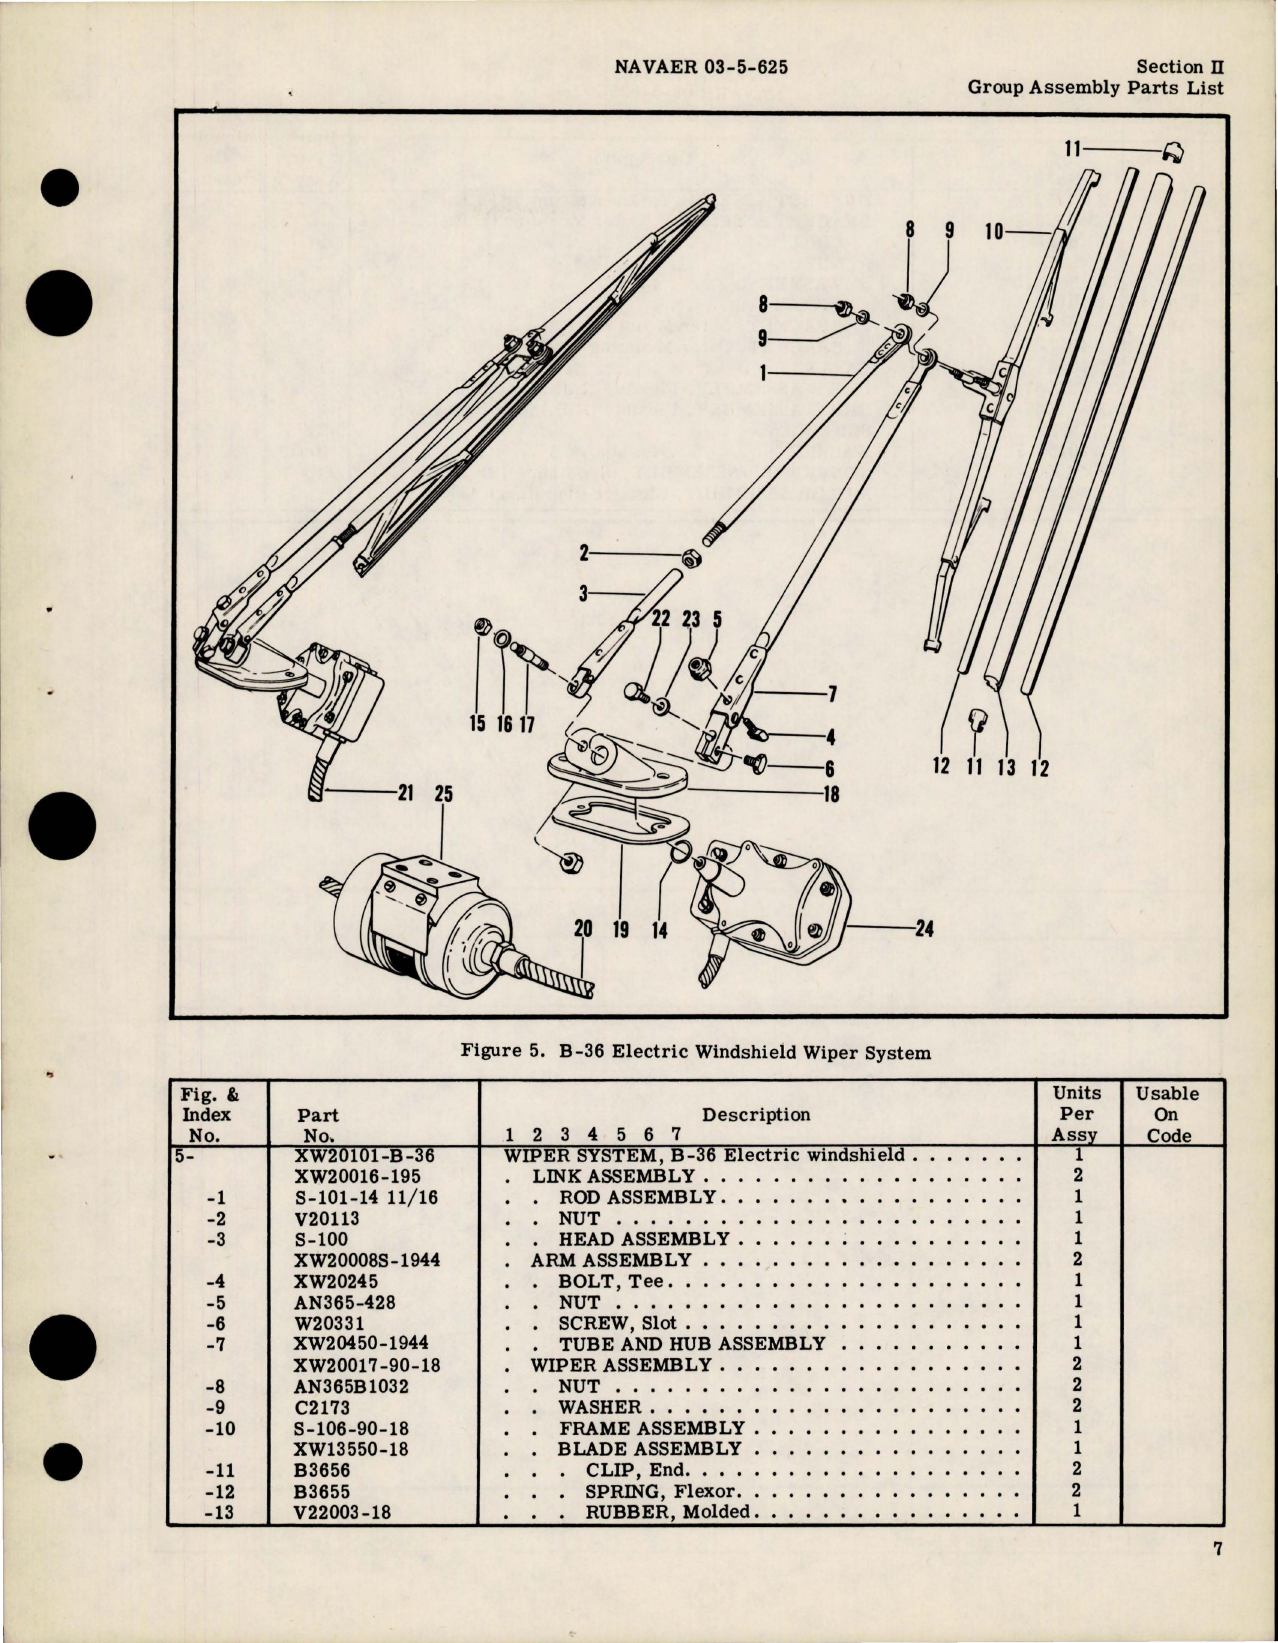 Sample page 9 from AirCorps Library document: Illustrated Parts Breakdown for Electric Windshield Wiper Systems 